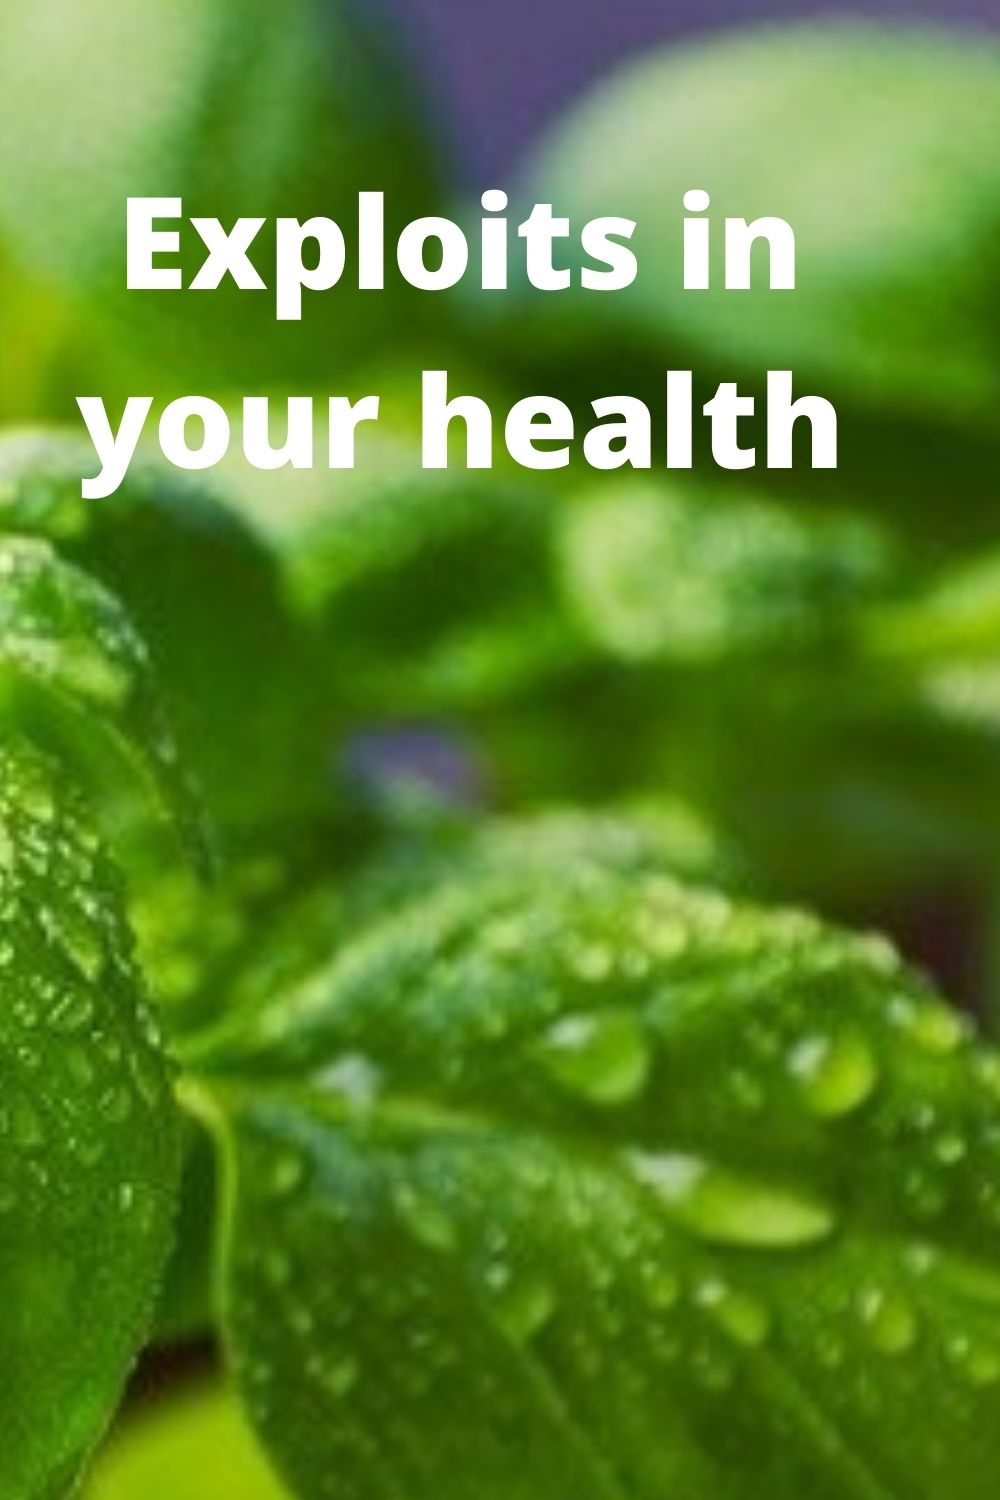 Healthy: Exploits in your Health